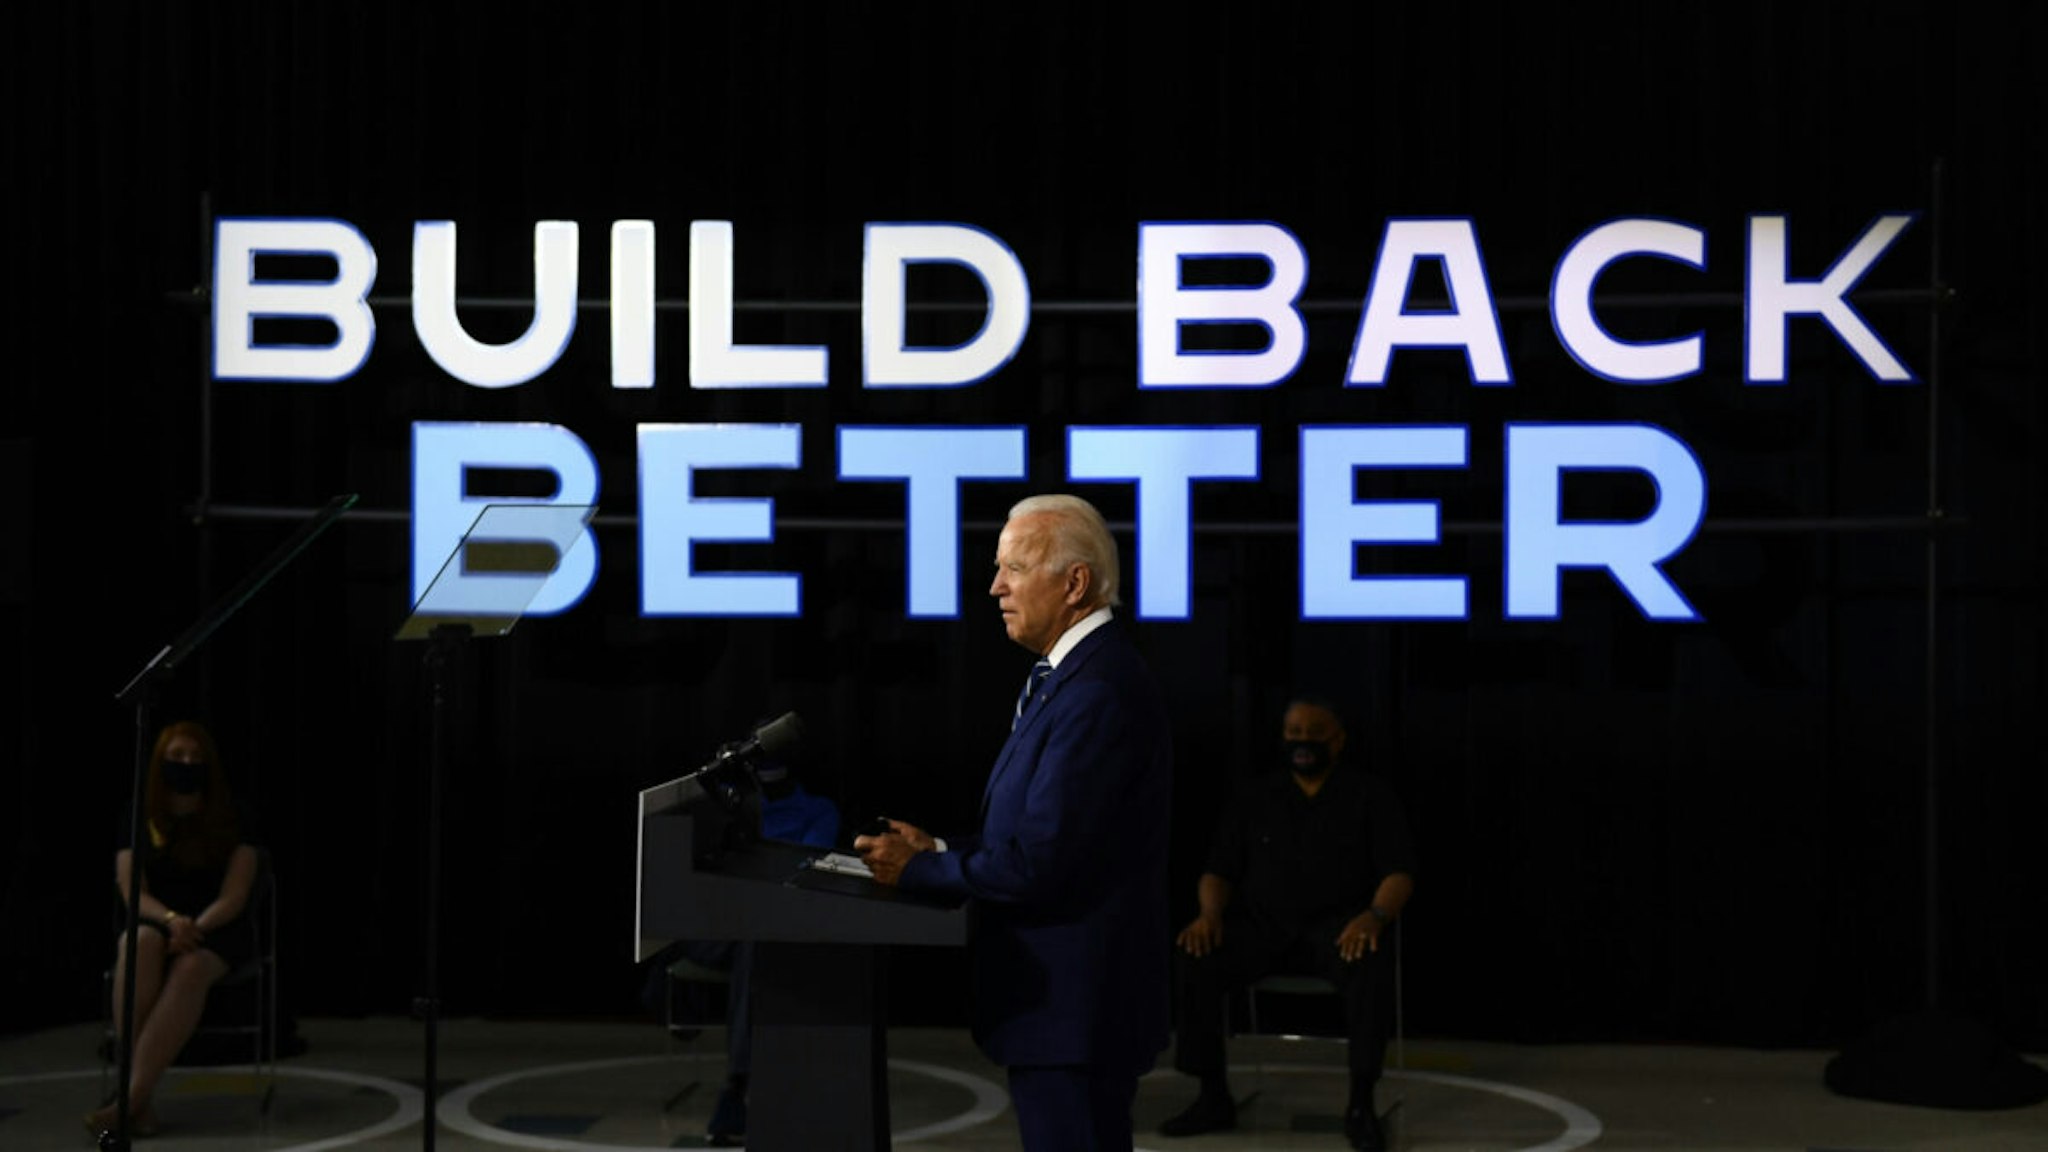 US Democratic presidential candidate Joe Biden speaks about on the third plank of his Build Back Better economic recovery plan for working families, on July 21, 2020, in New Castle, Delaware.